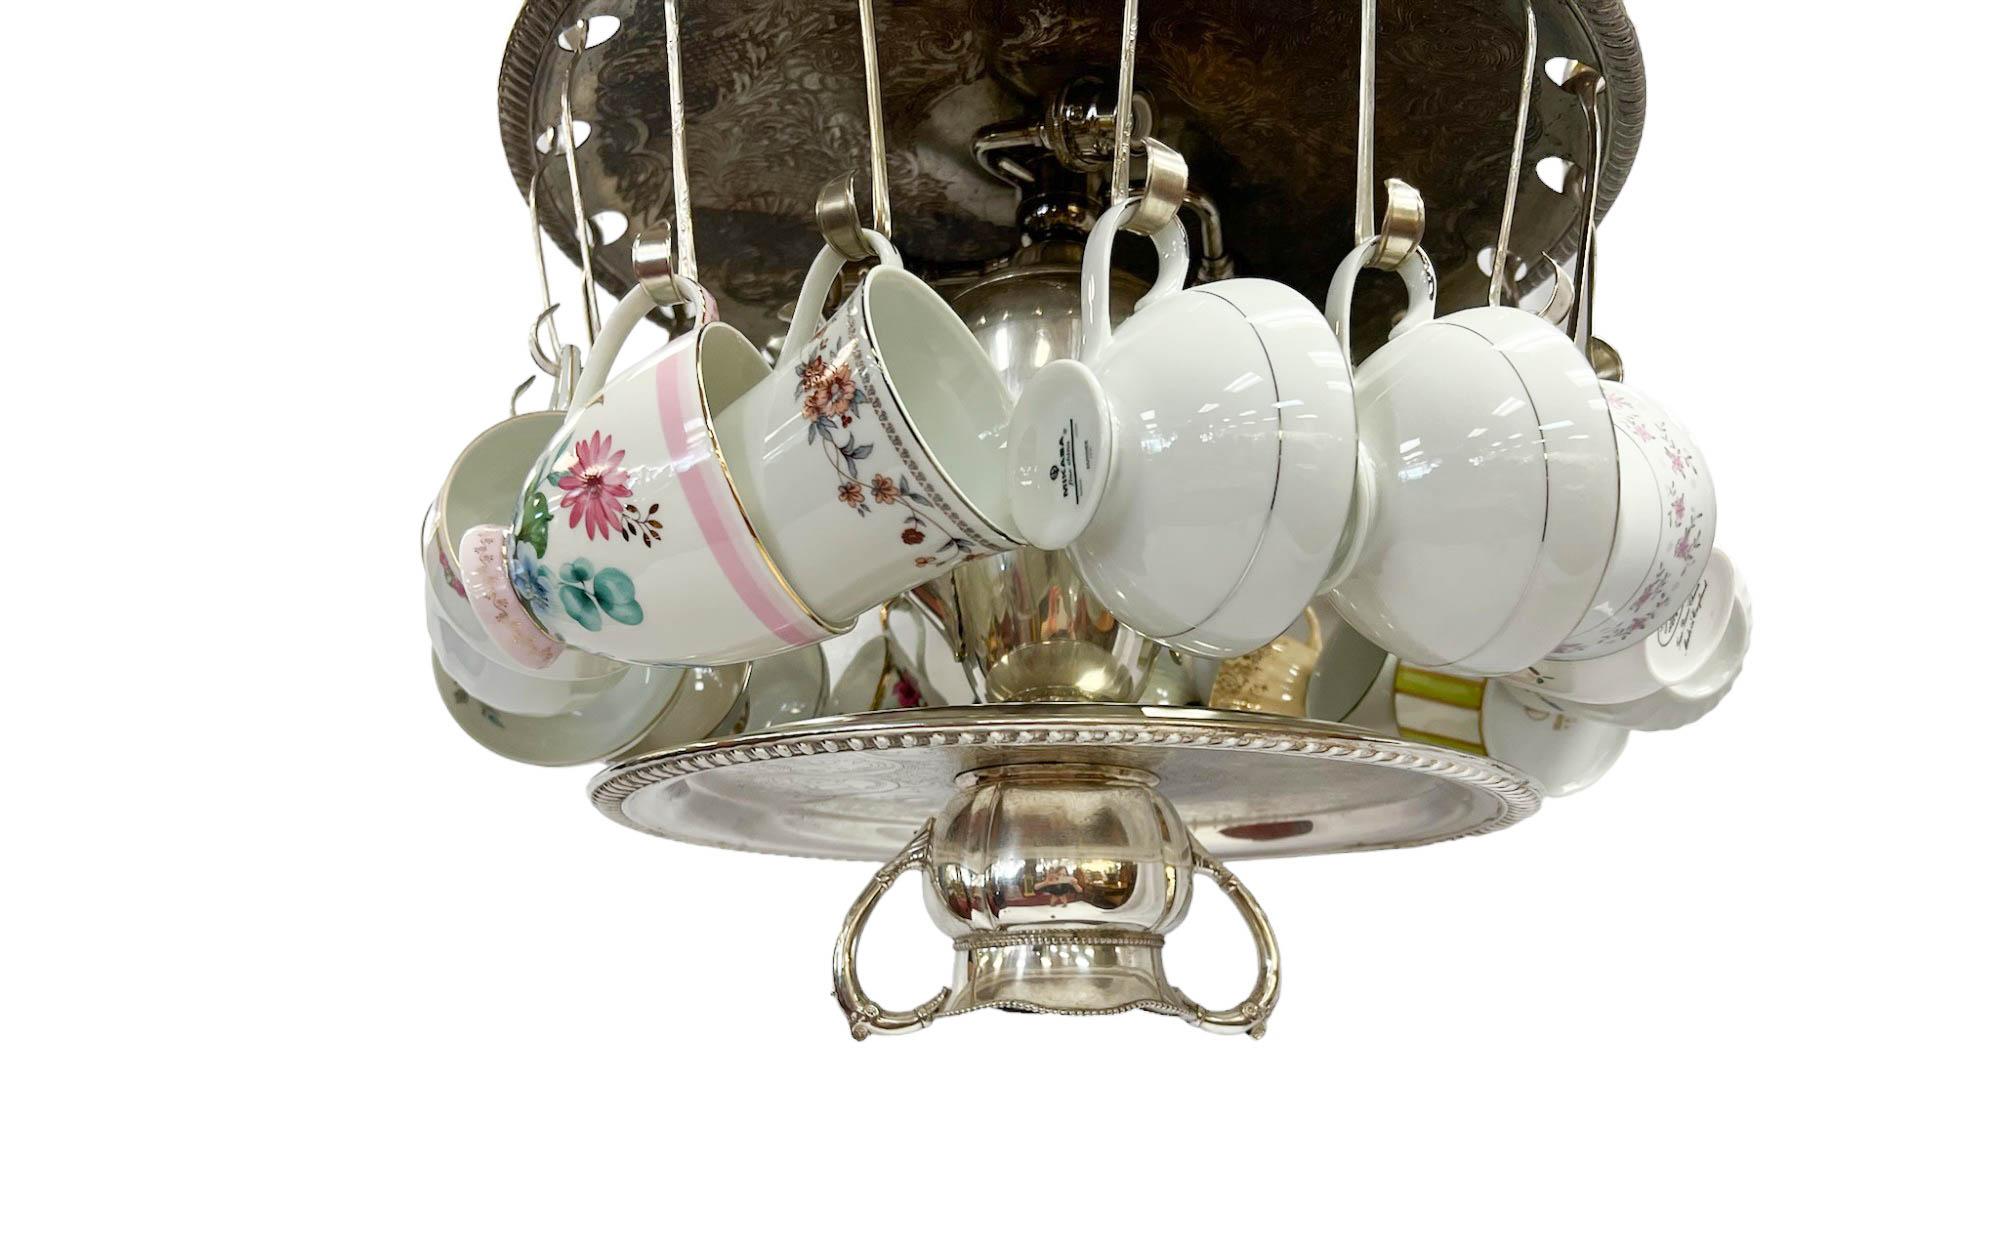 Hand-Crafted Vintage One-Of-A-Kind Handcrafted Teacup Chandelier For Sale